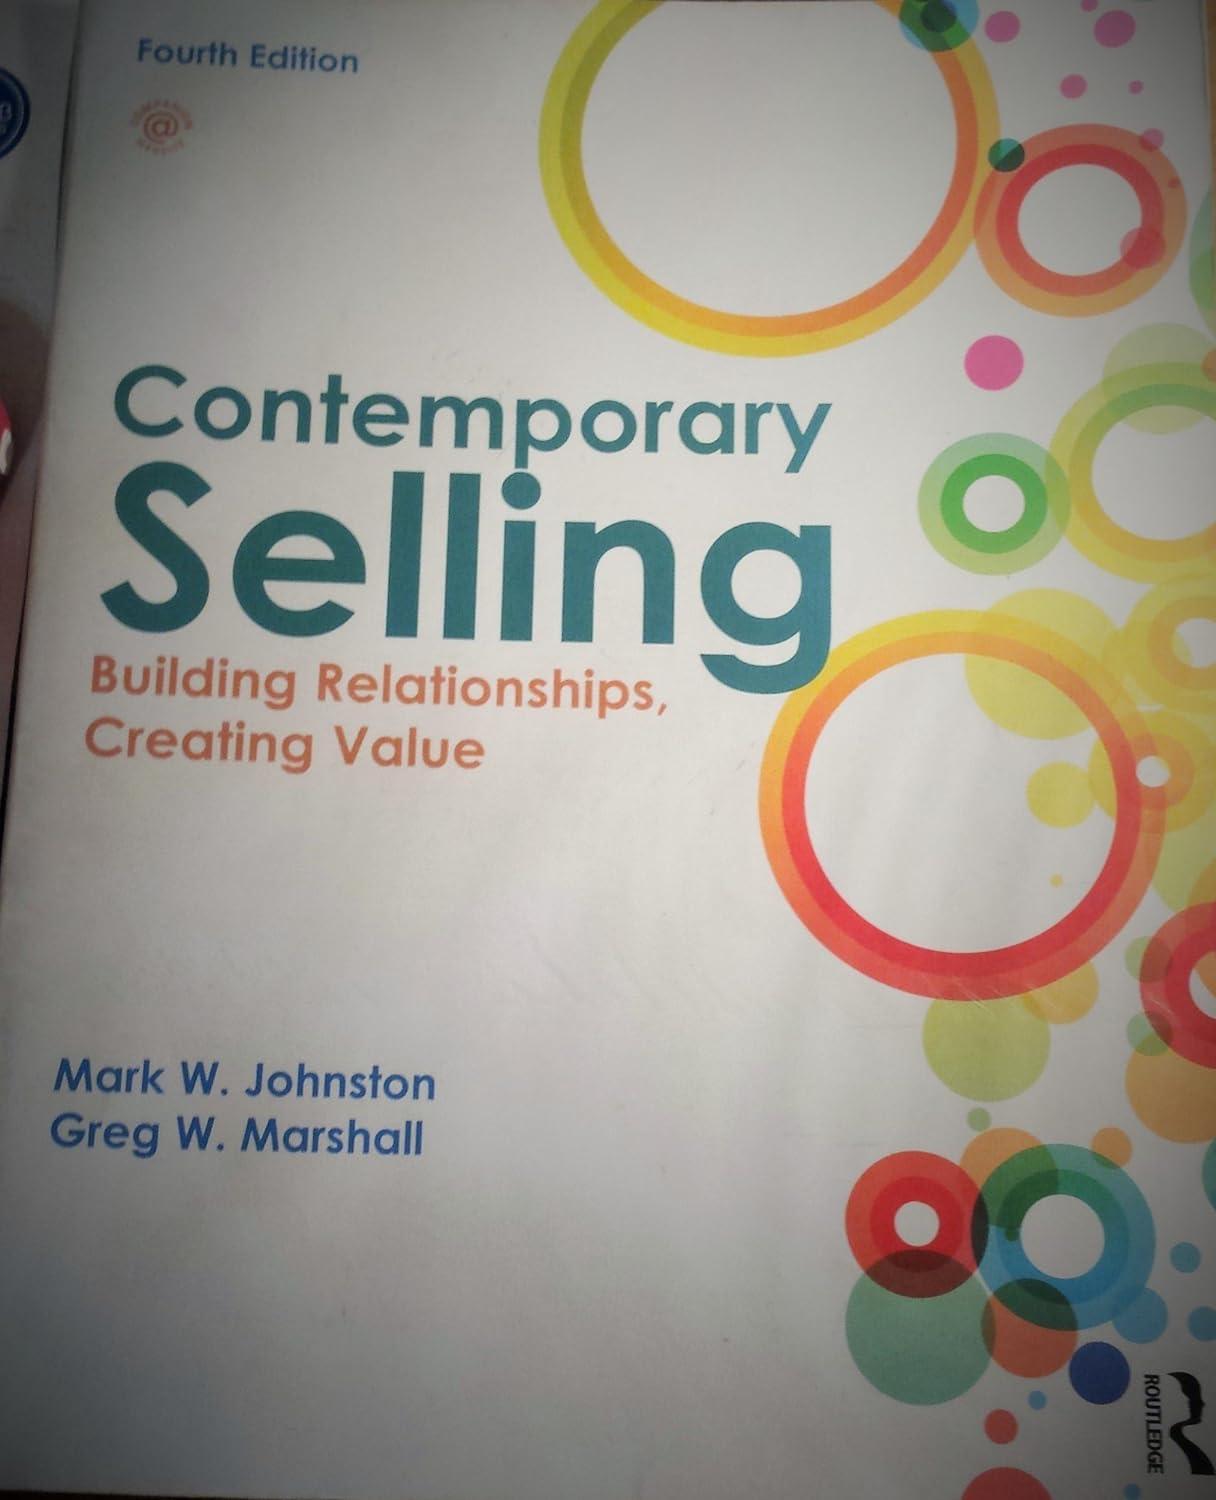 contemporary selling building relationships creating value 4th edition mark w. johnston, greg w. marshall